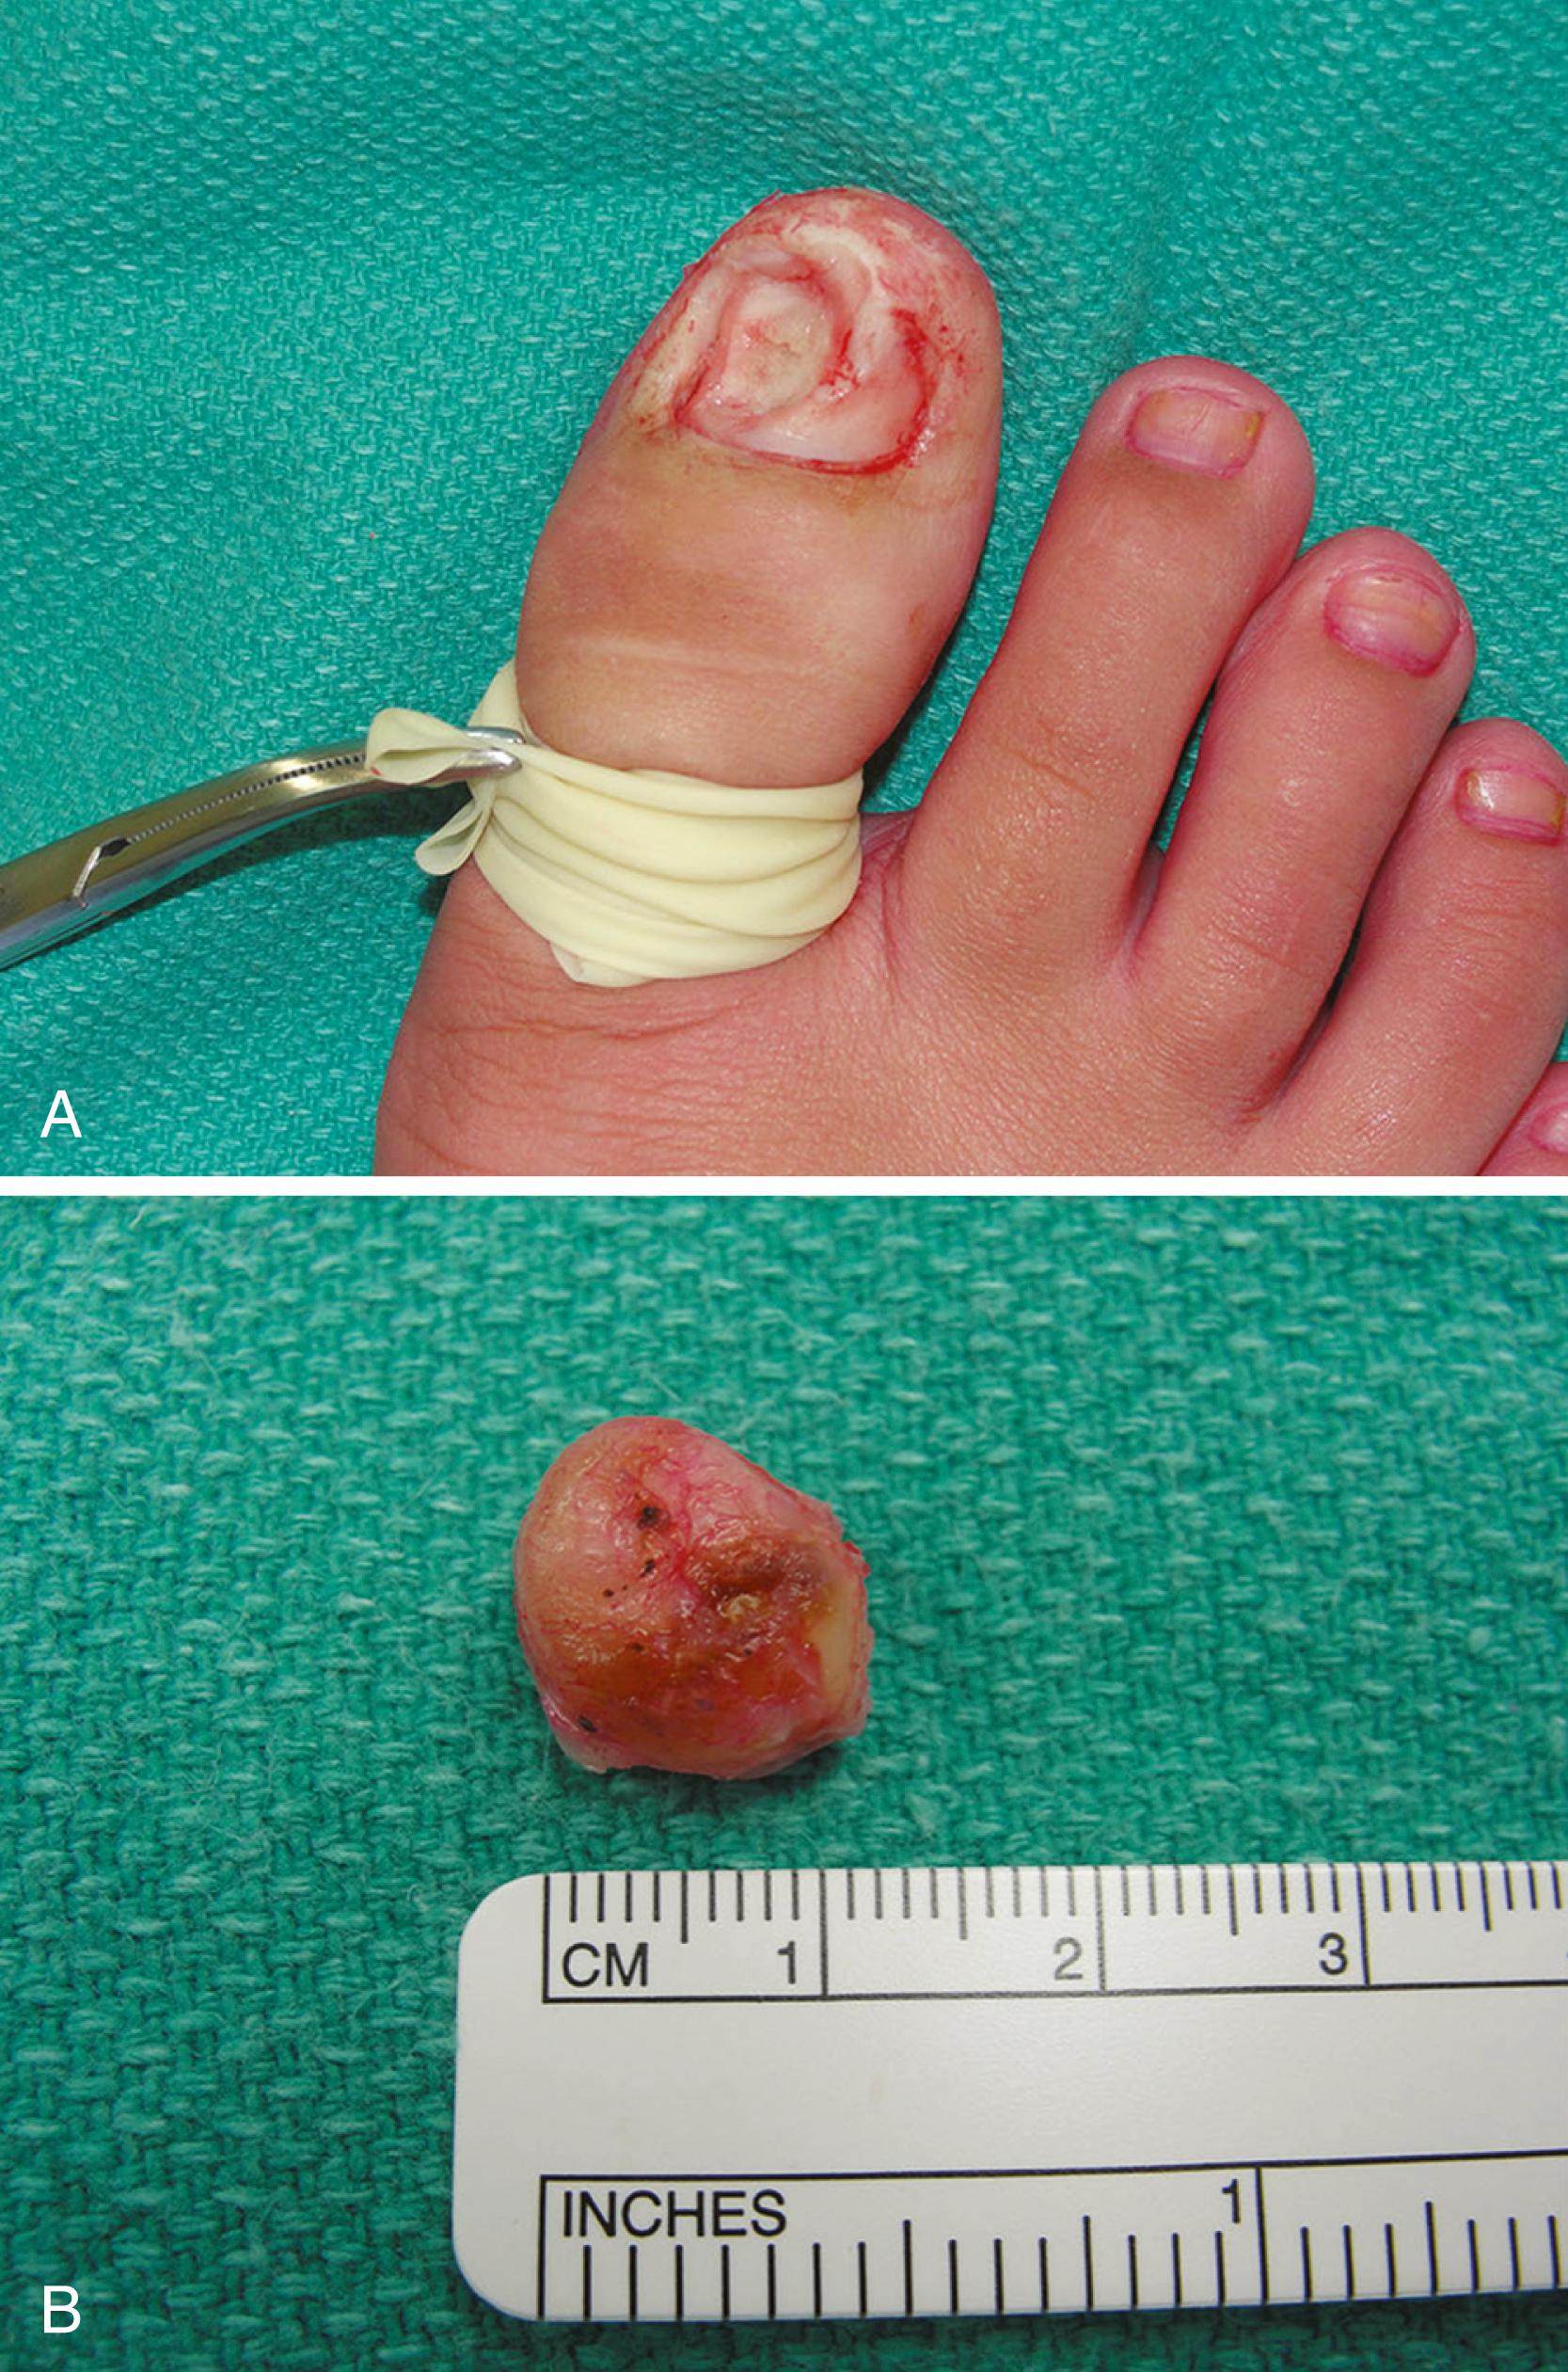 FIGURE 88.5, Marginal excision of subungual exostosis. A , Because lesion had invaded nail bed, making it unsalvageable, direct dorsal exostectomy was done. B , Osteocartilaginous lesion was marginally resected, and base of stalk was curetted, ronguered, and burred down to create “saucer-like” defect.